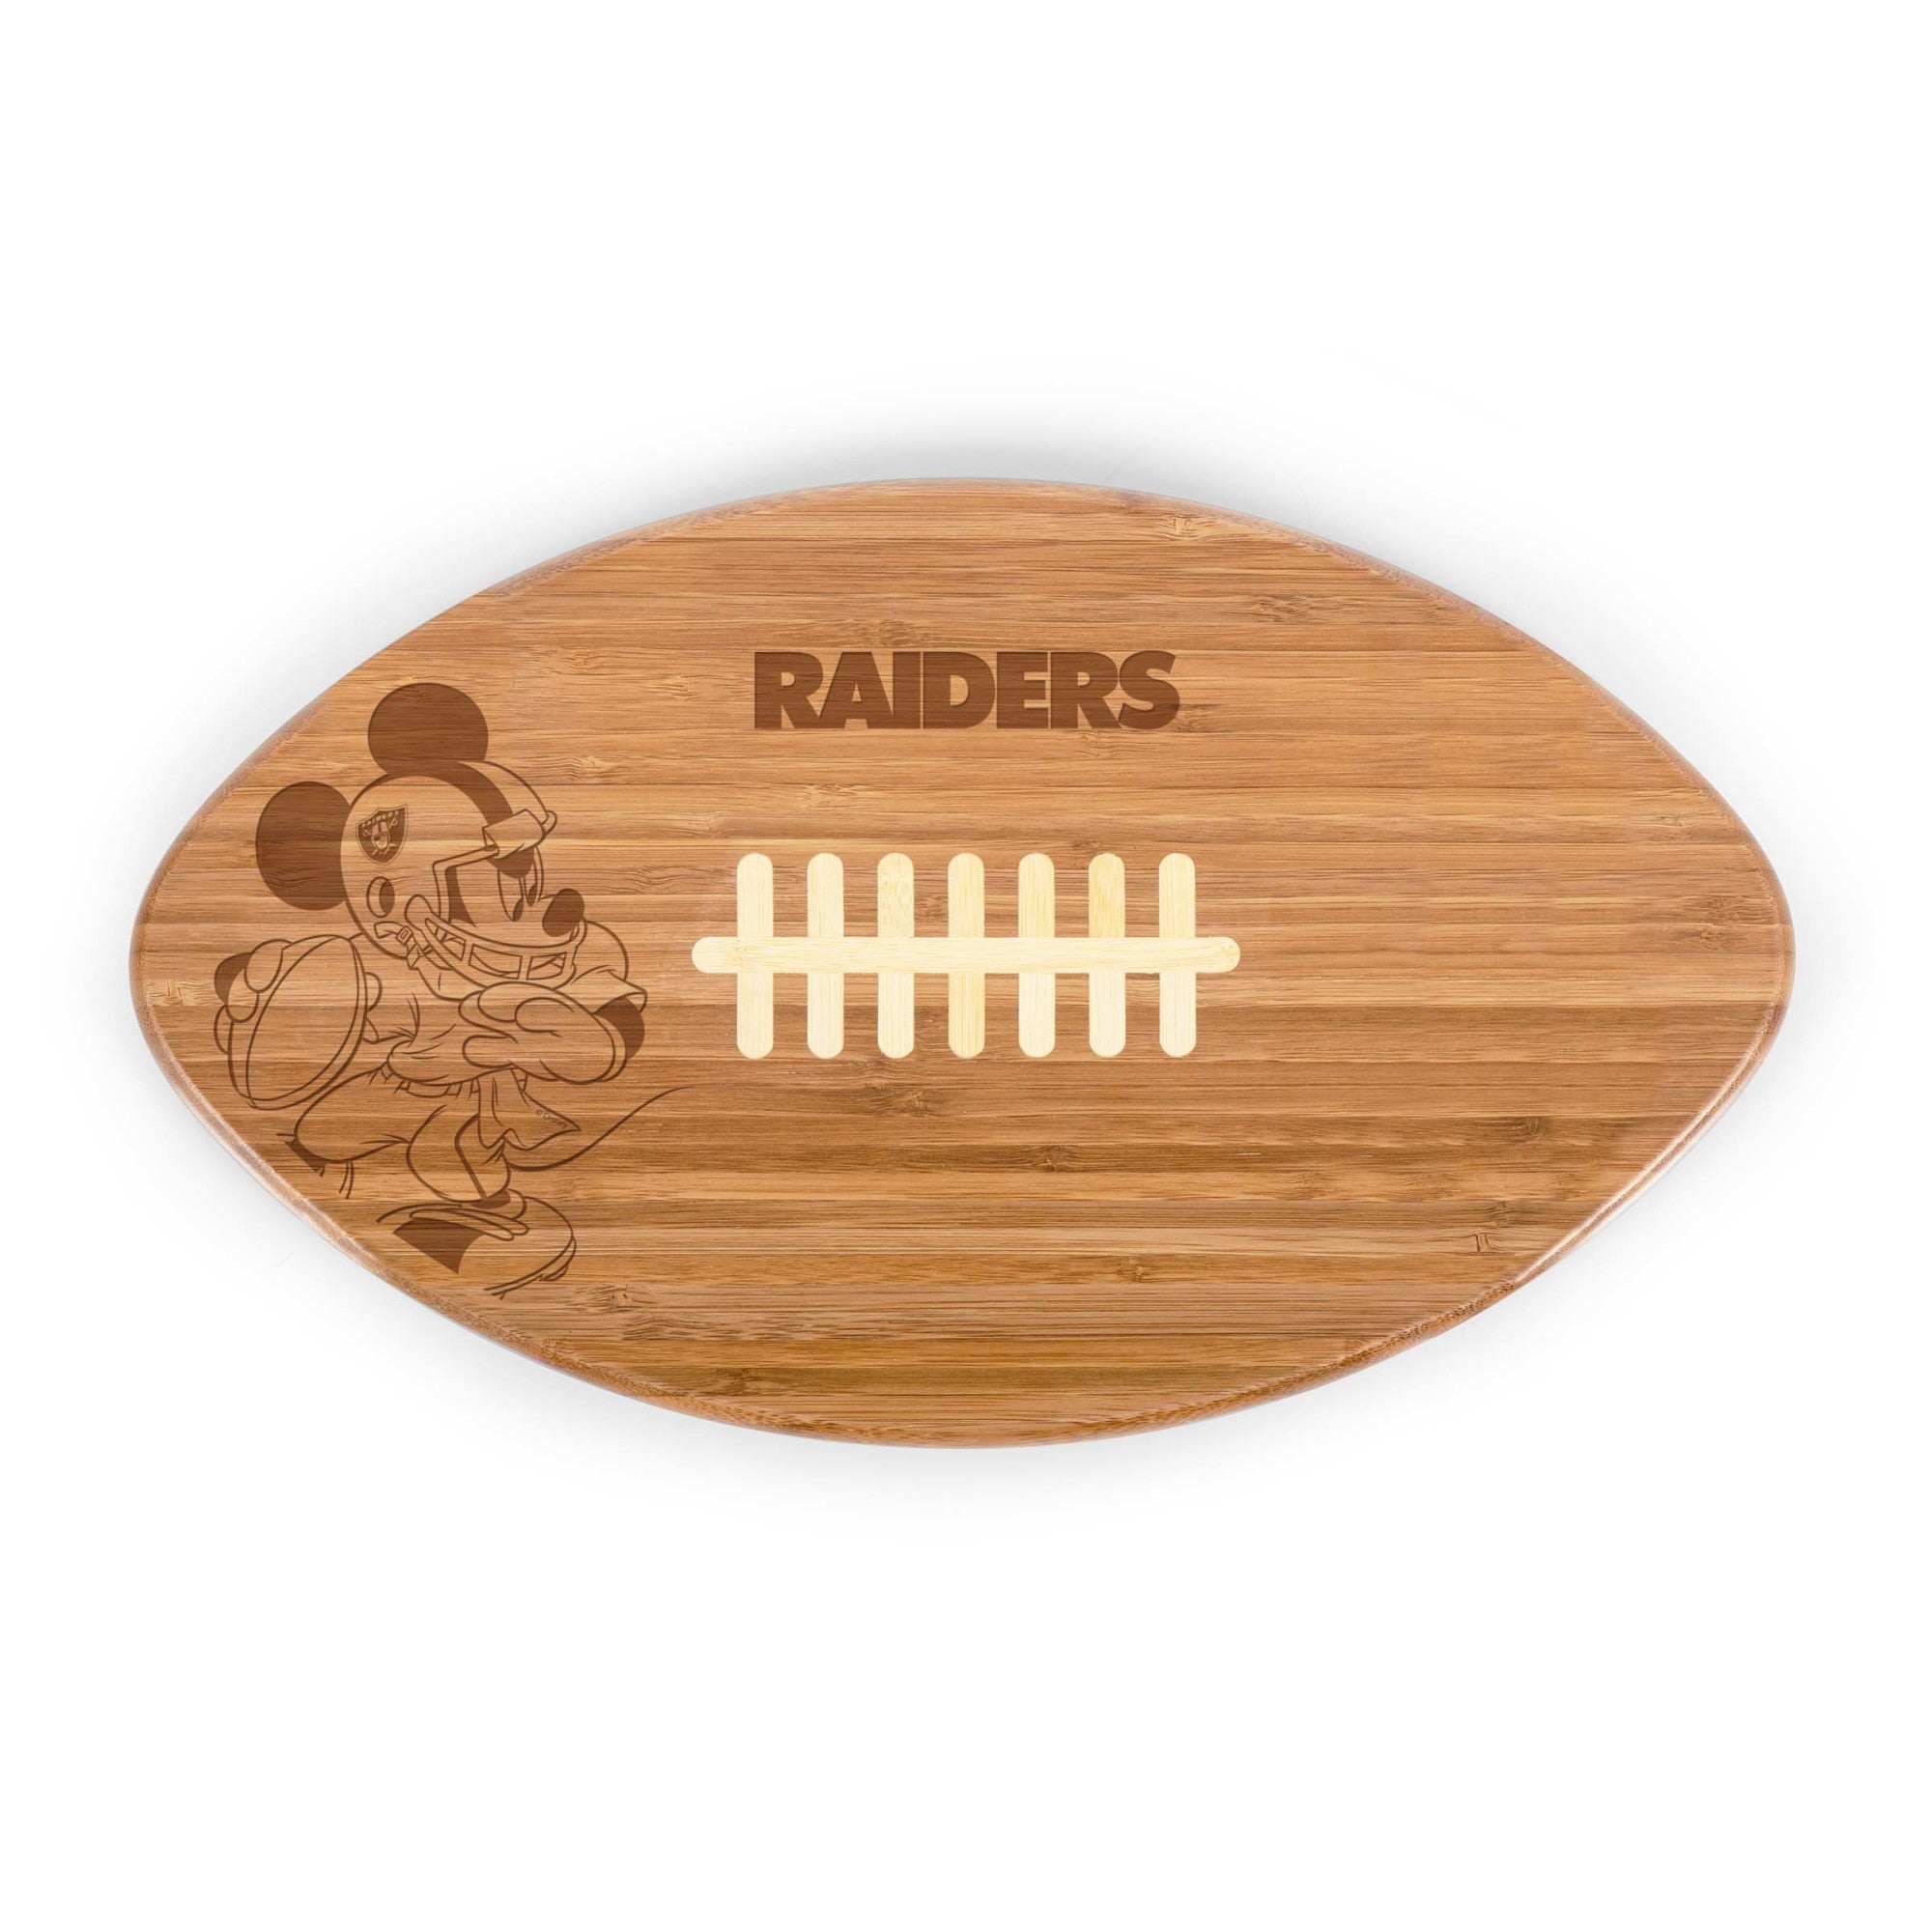 Las Vegas Raiders Mickey Mouse - Touchdown! Football Cutting Board & Serving Tray